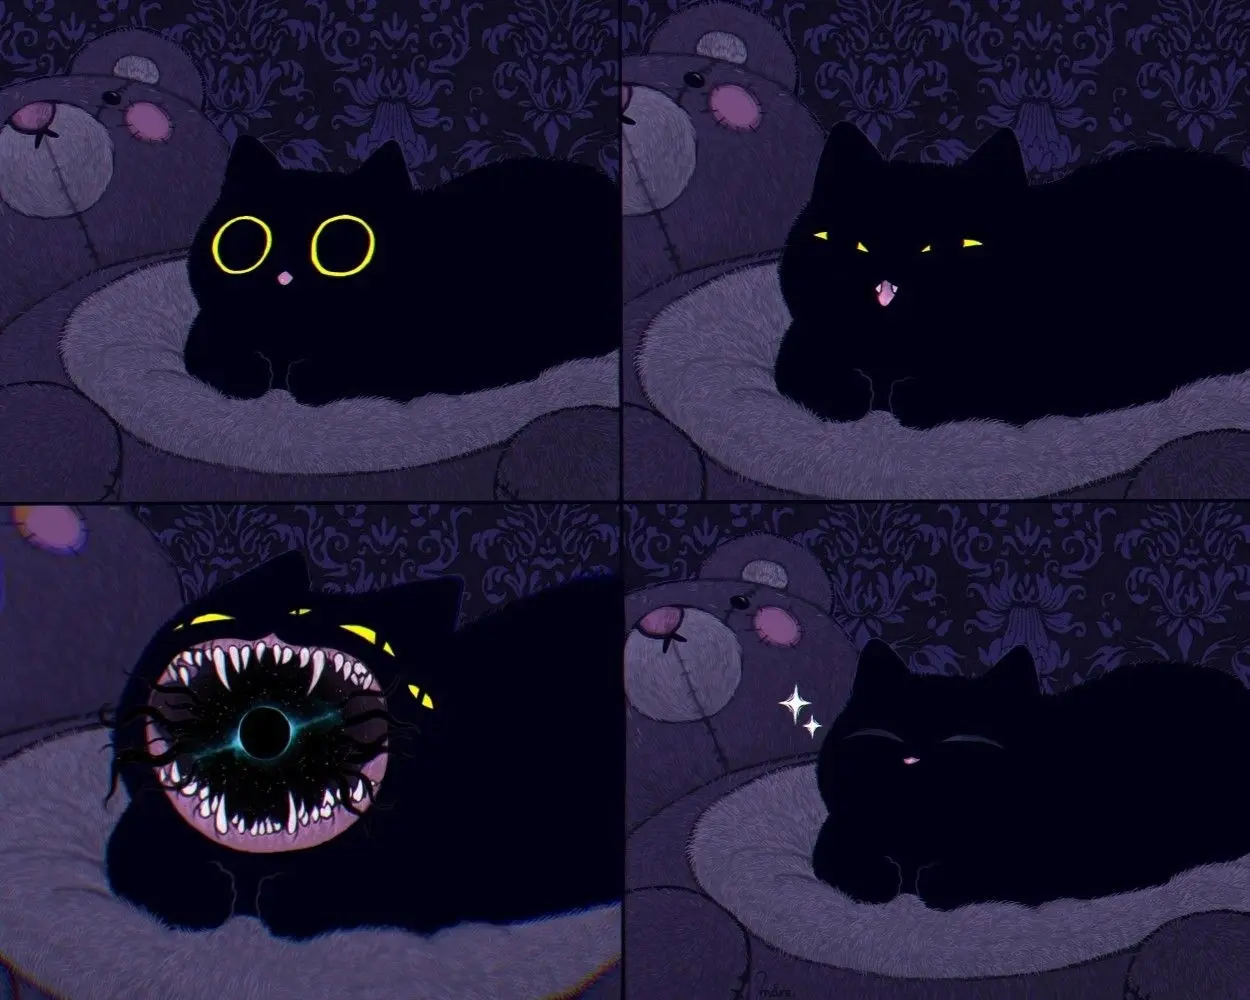 4 panel comic featuring a black cat. In the 1st panel its eyes are open wide and its tongue is sticking out a bit. In the 2nd panel its eyes have started narrowing and mouth opening a bit. In the 3rd panel its mouth is agape, revealing a mouthful of monstrous teeth with black tentacles curling out of what looks like a black hole in the depths of its mouth, and it now has 4 eyes around its gaping maw. In the 4th panel it looks like a normal kitty again, eyes closed and looking contented